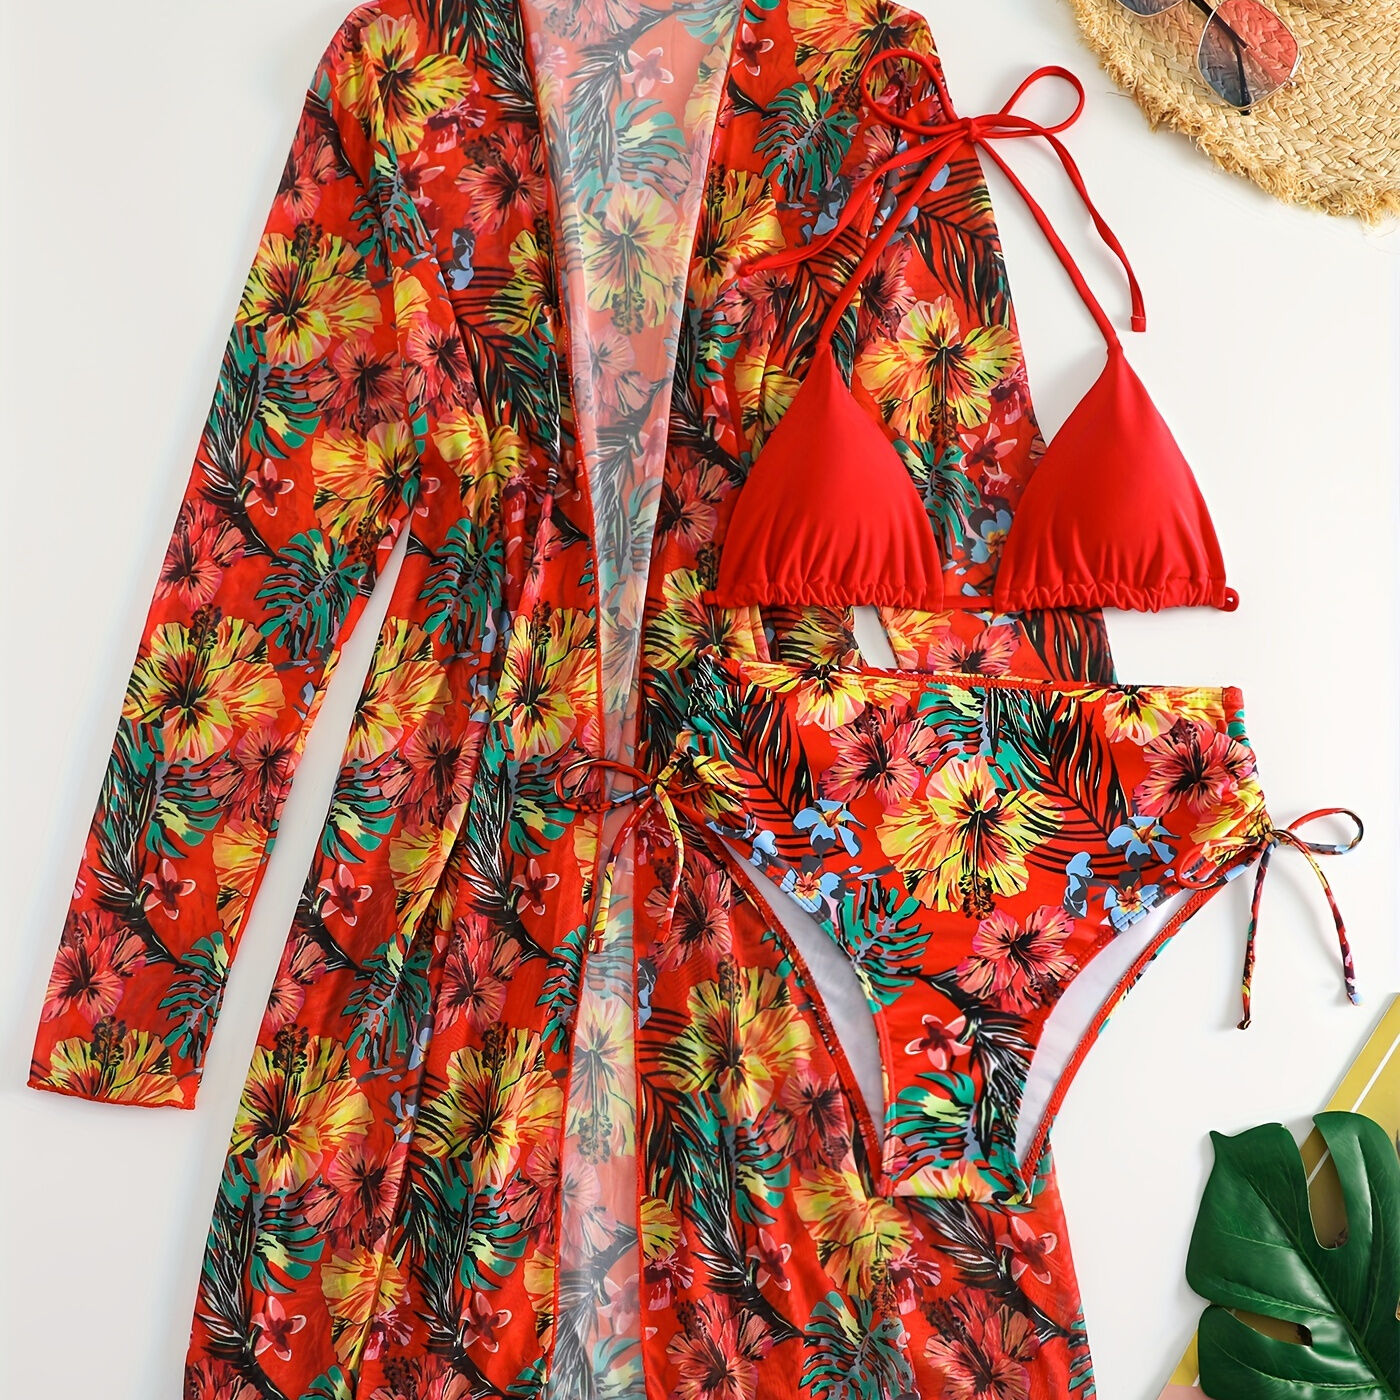 Temu 3-pieces Tropical Print Bikini Sets, Halter Neck Tie Back Tie Side High Cut With Cover Up Shirt Swimsuit, Women's Swimwear & Clothing Triangle Top Rose Red L